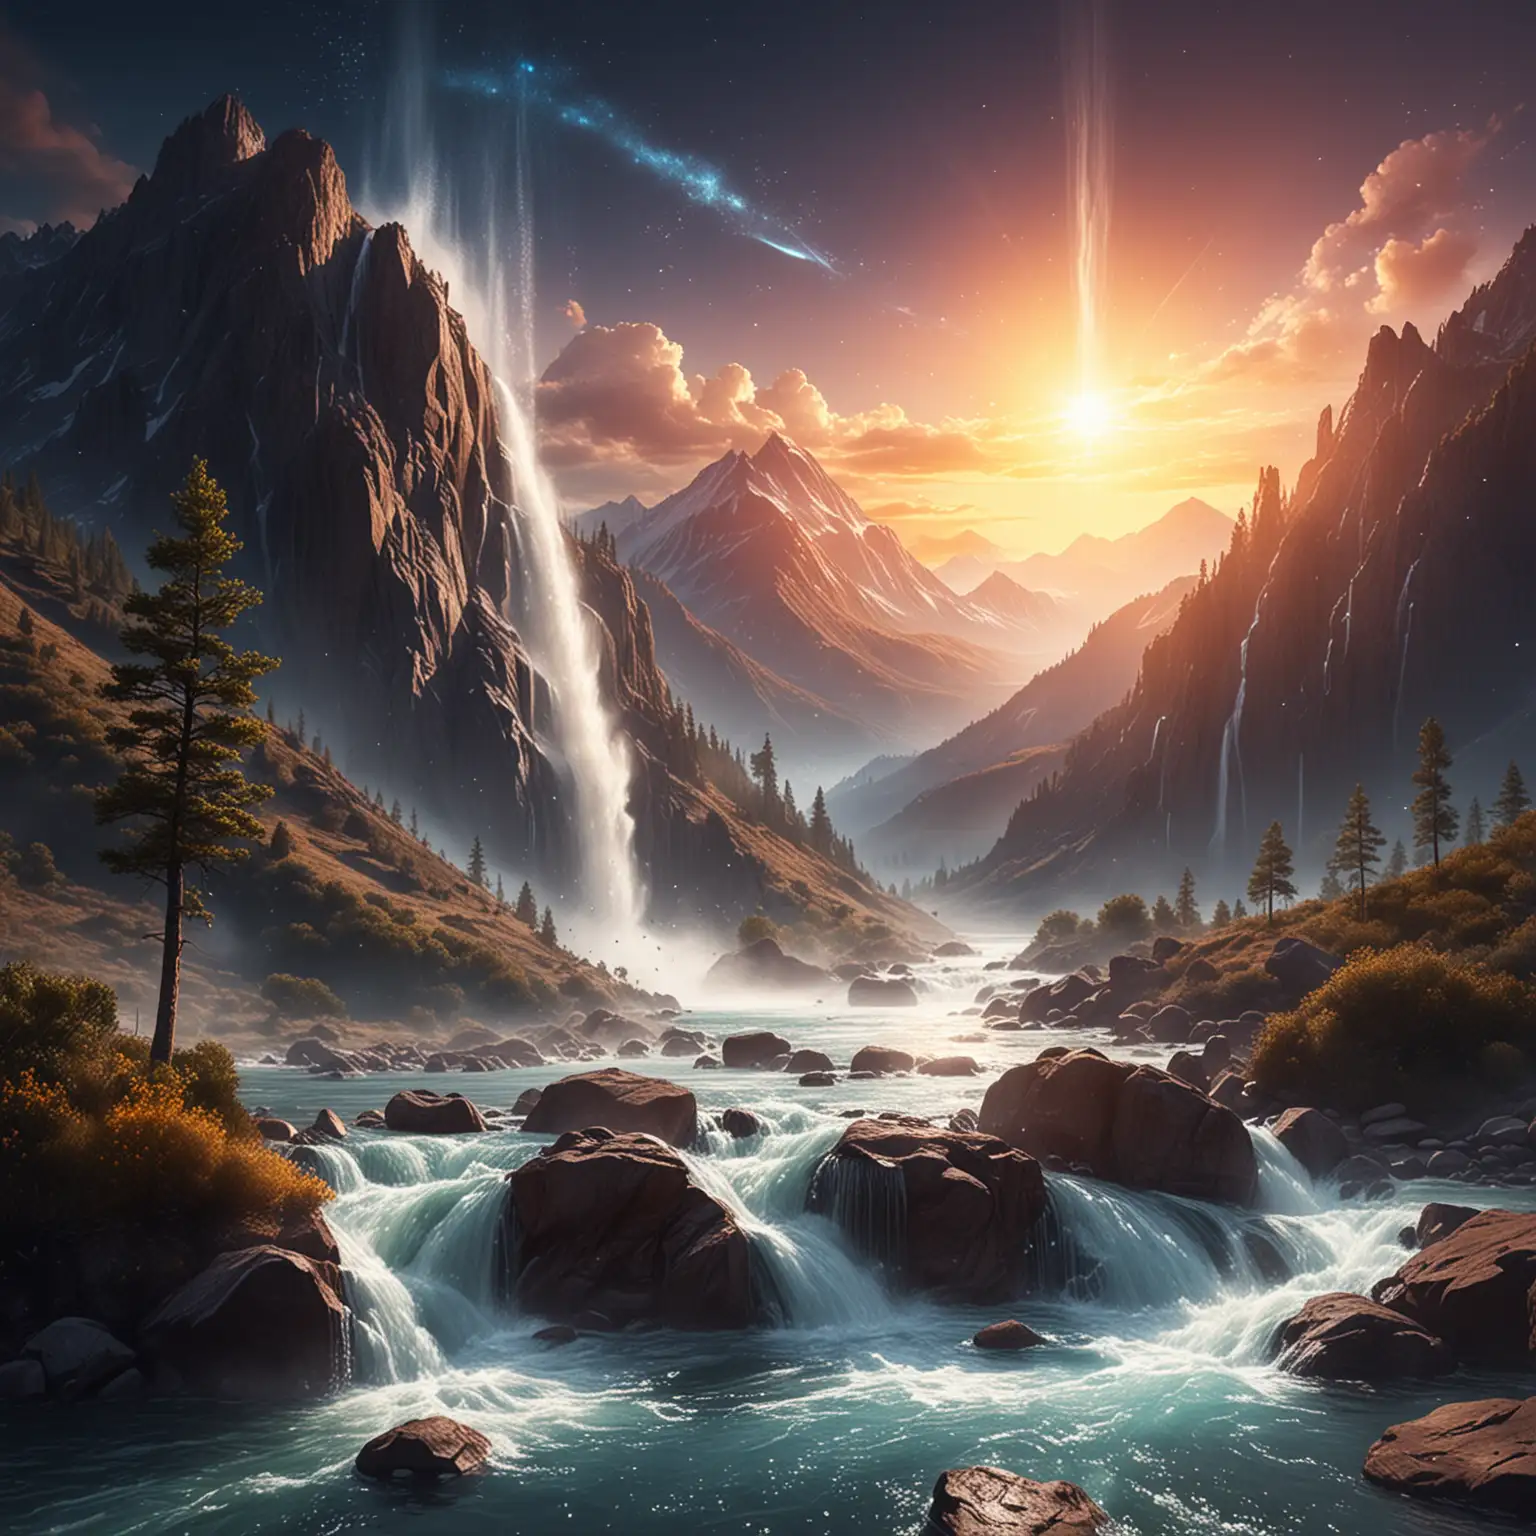 Majestic Mountain Landscape with Cosmic Waterfall and Sunrise